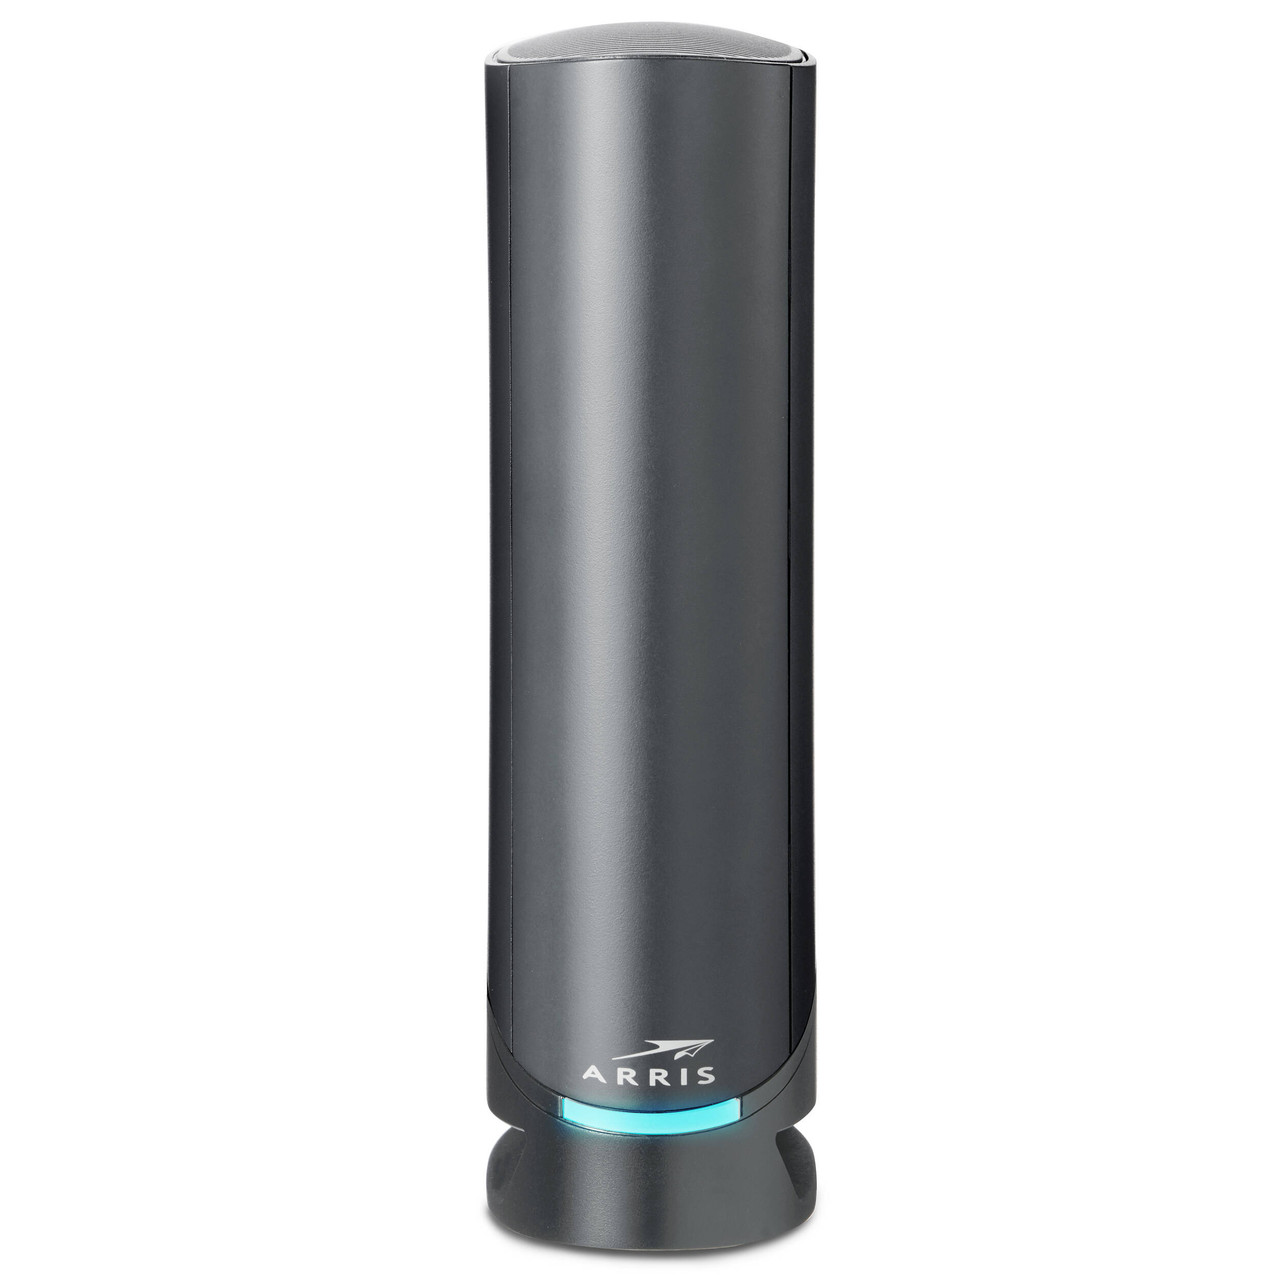 ARRIS Surfboard G34-RB AX3000 DOCSIS 3.1 Gigabit Cable Modem & Wi-Fi 6 Router - Certified Refurbished